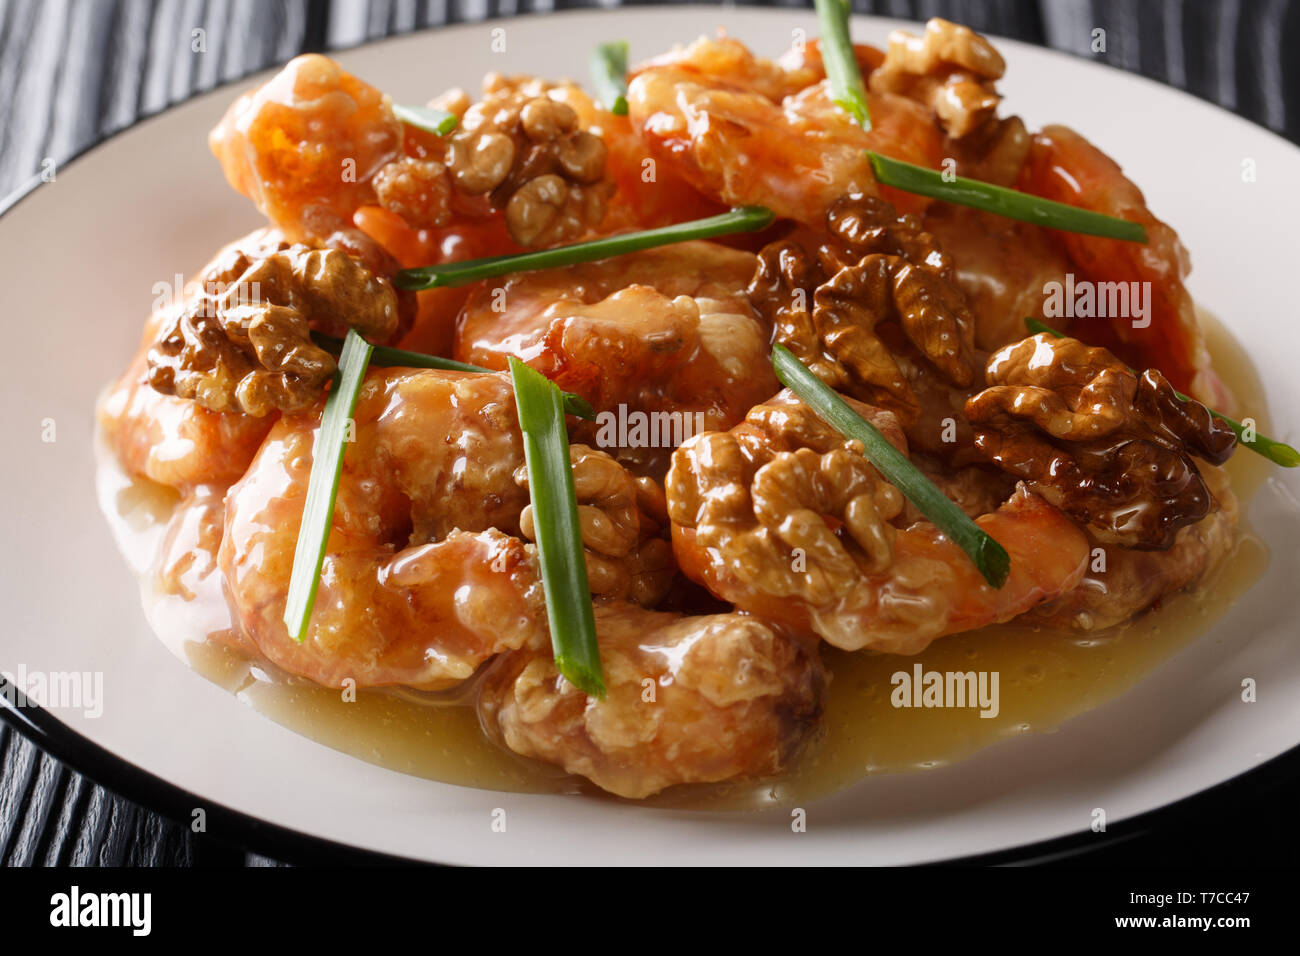 Crispy shrimp tossed in a creamy sweet sauce and candied walnuts close-up on a plate. horizontal Stock Photo